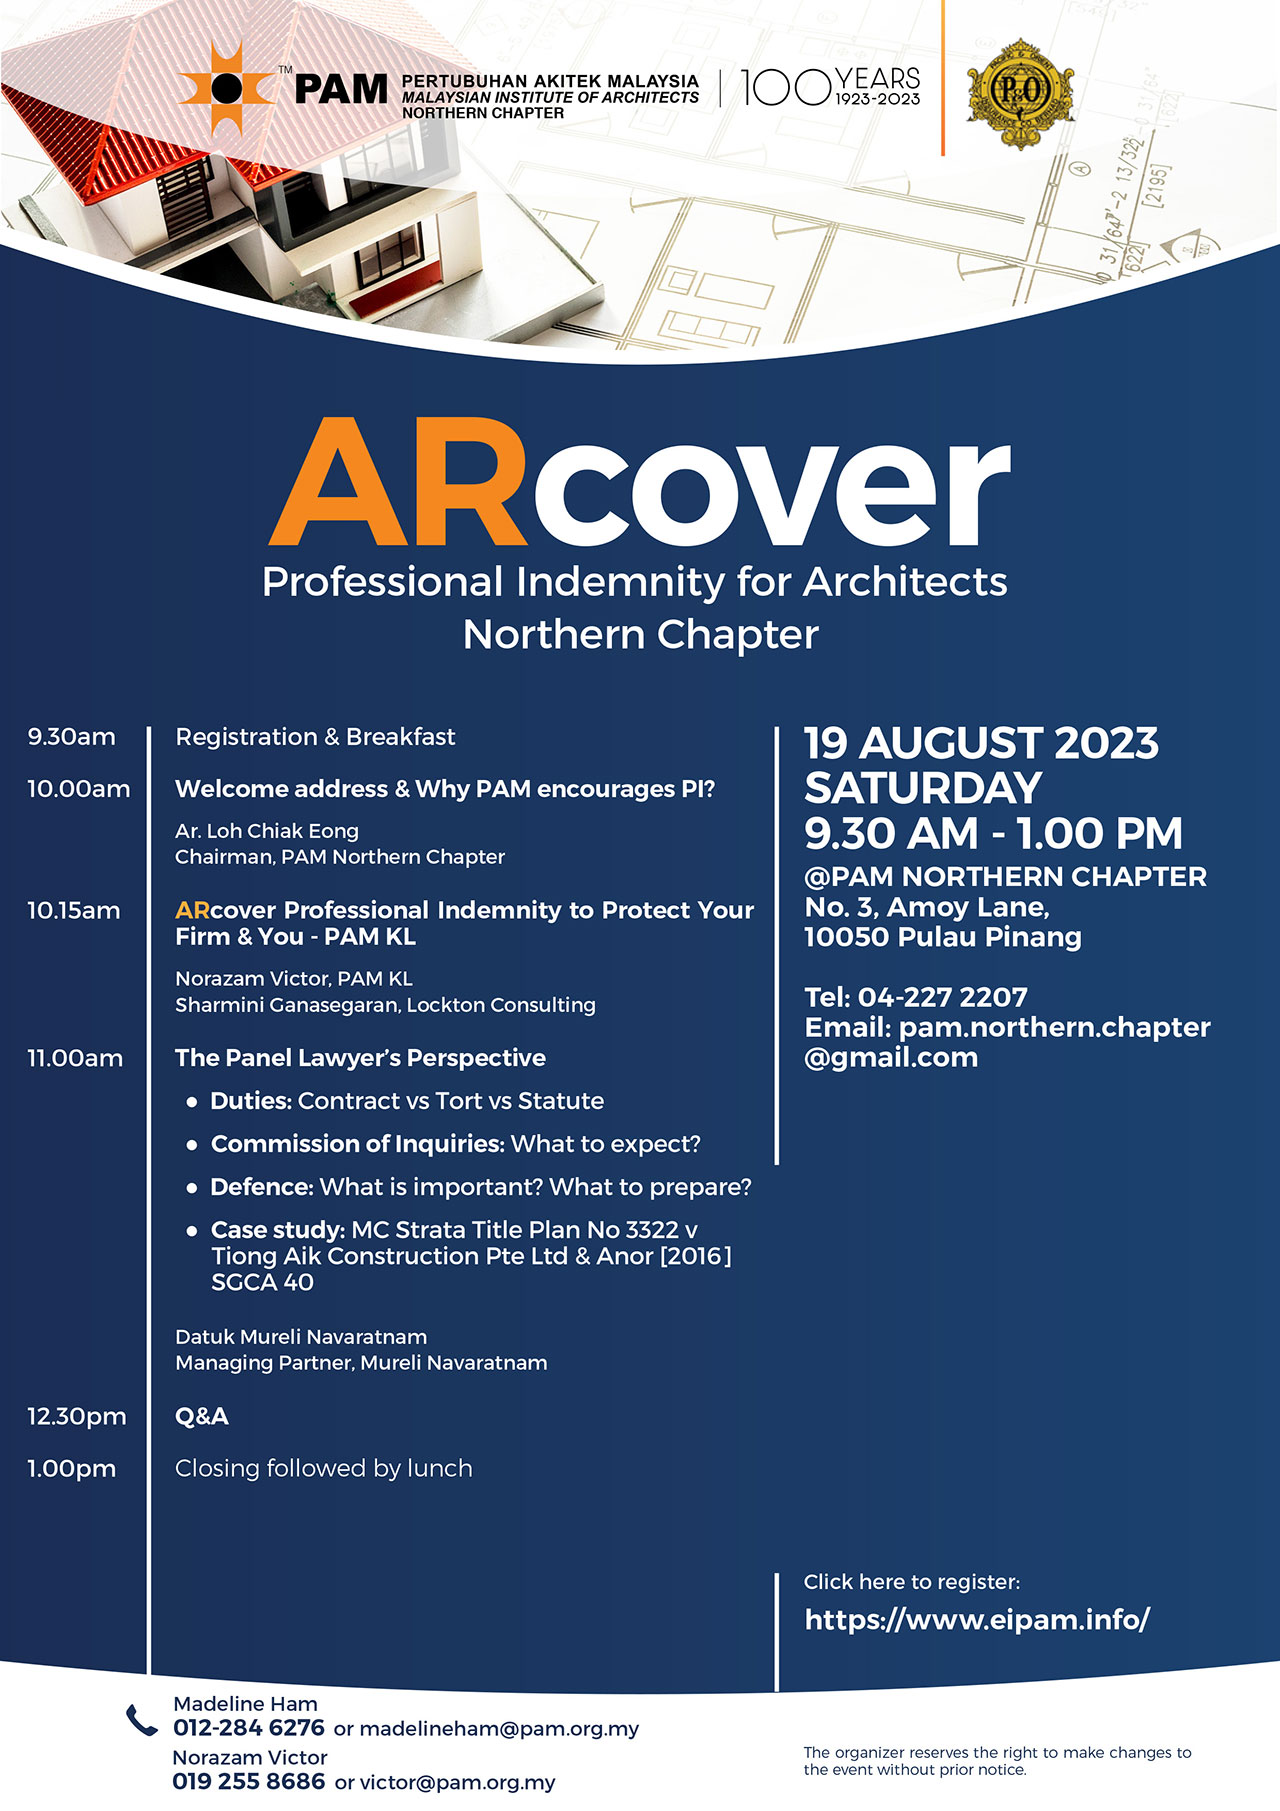 ARcover Professional Indemnity for Architects Northern Chapter